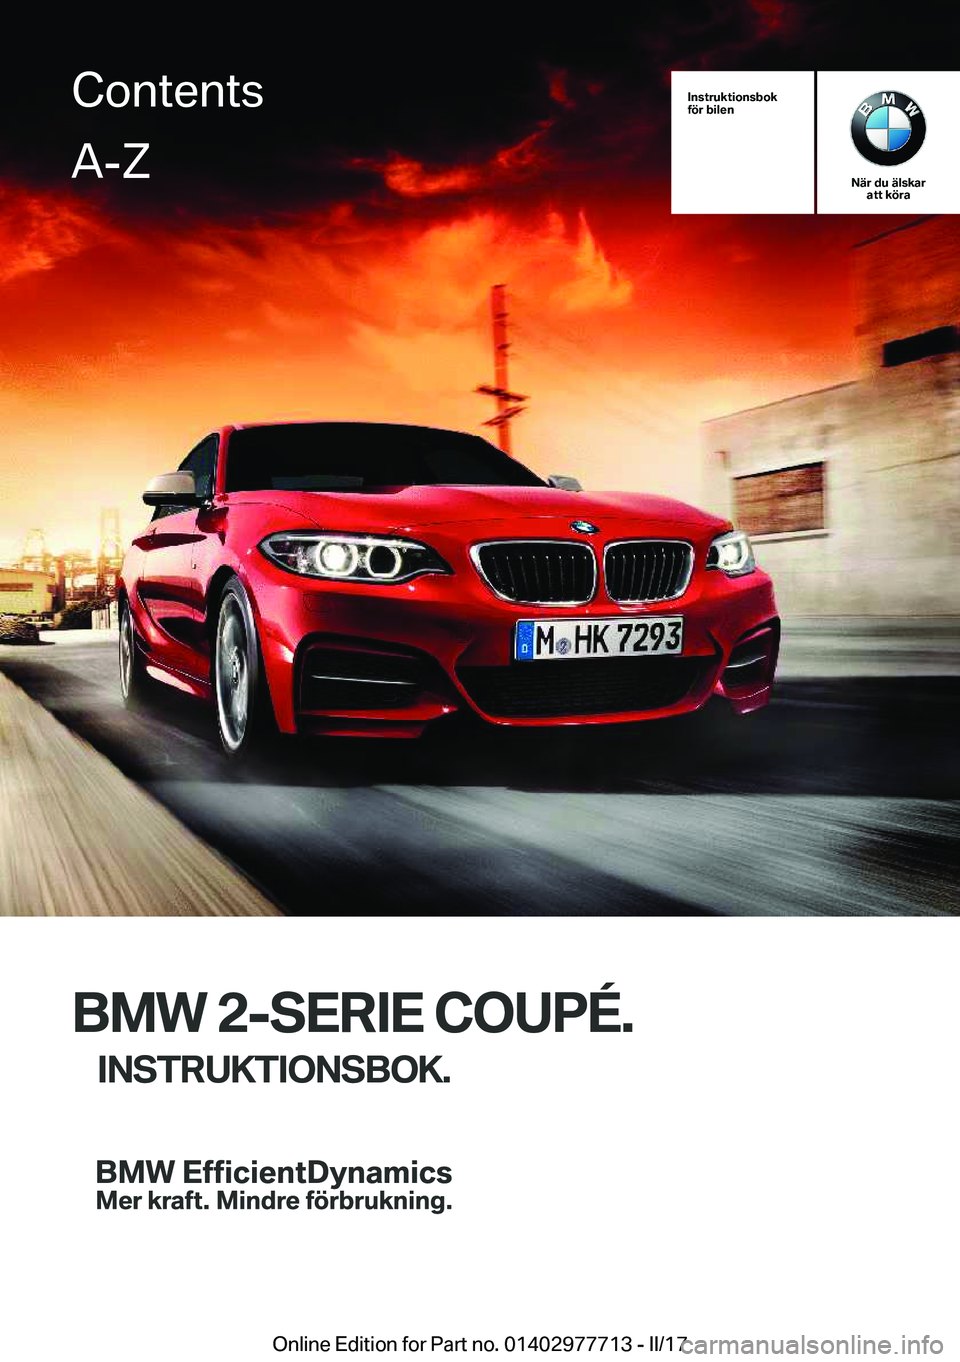 BMW 2 SERIES COUPE 2017  InstruktionsbÖcker (in Swedish) 